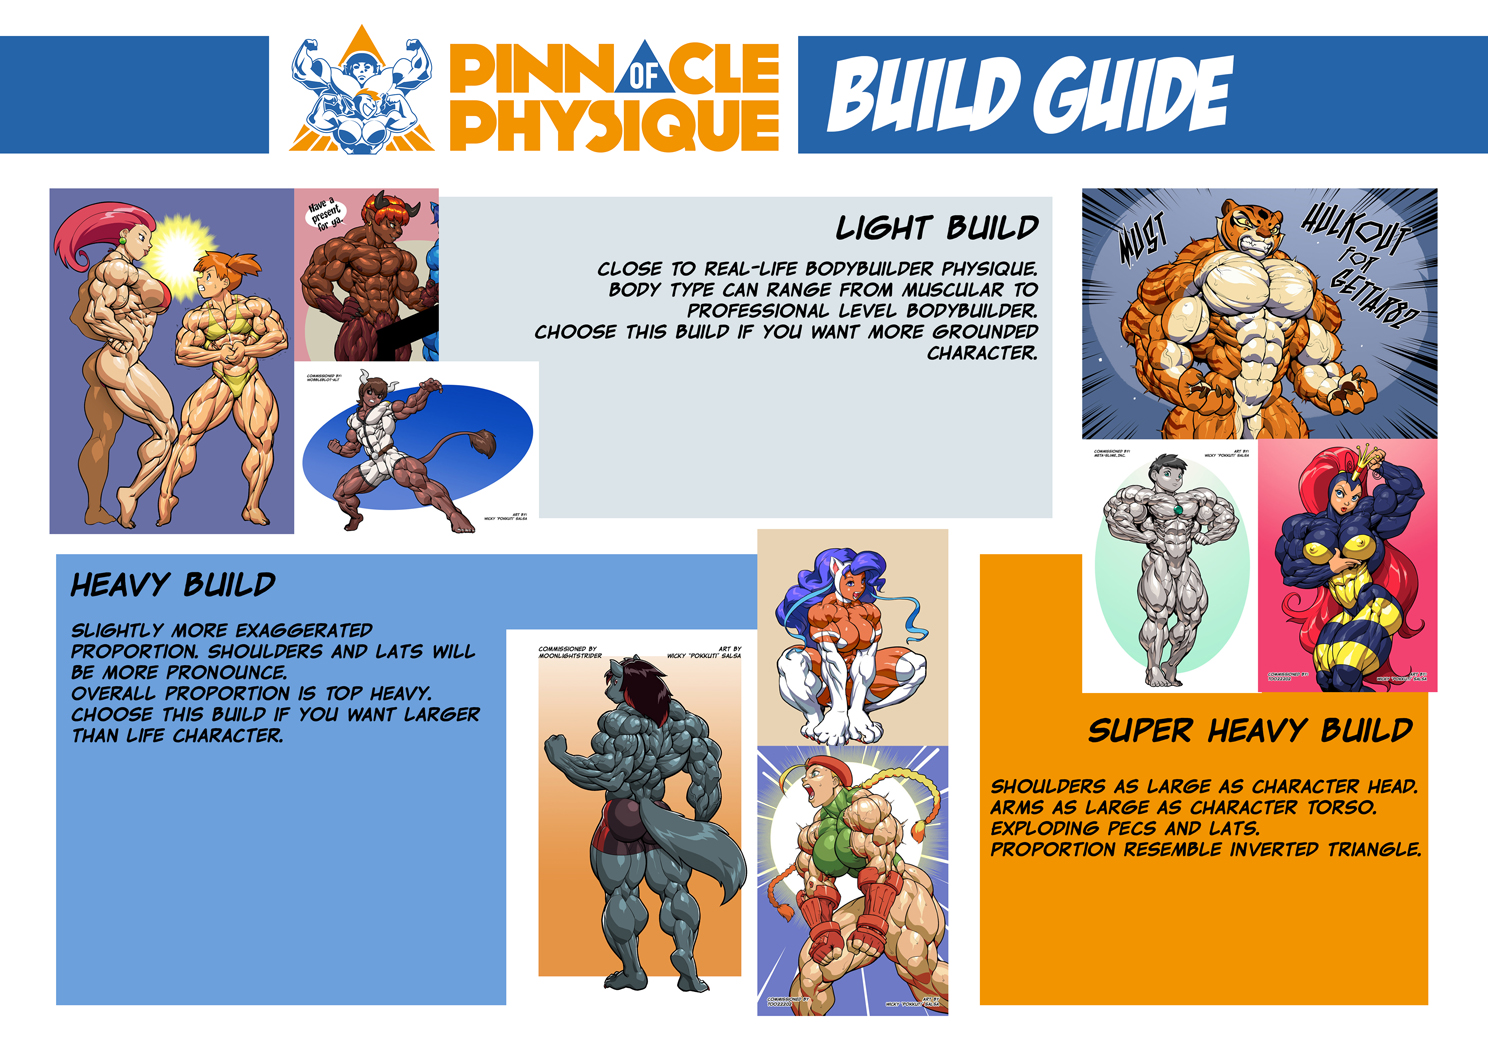 Pinnacle of Physique Build Guide